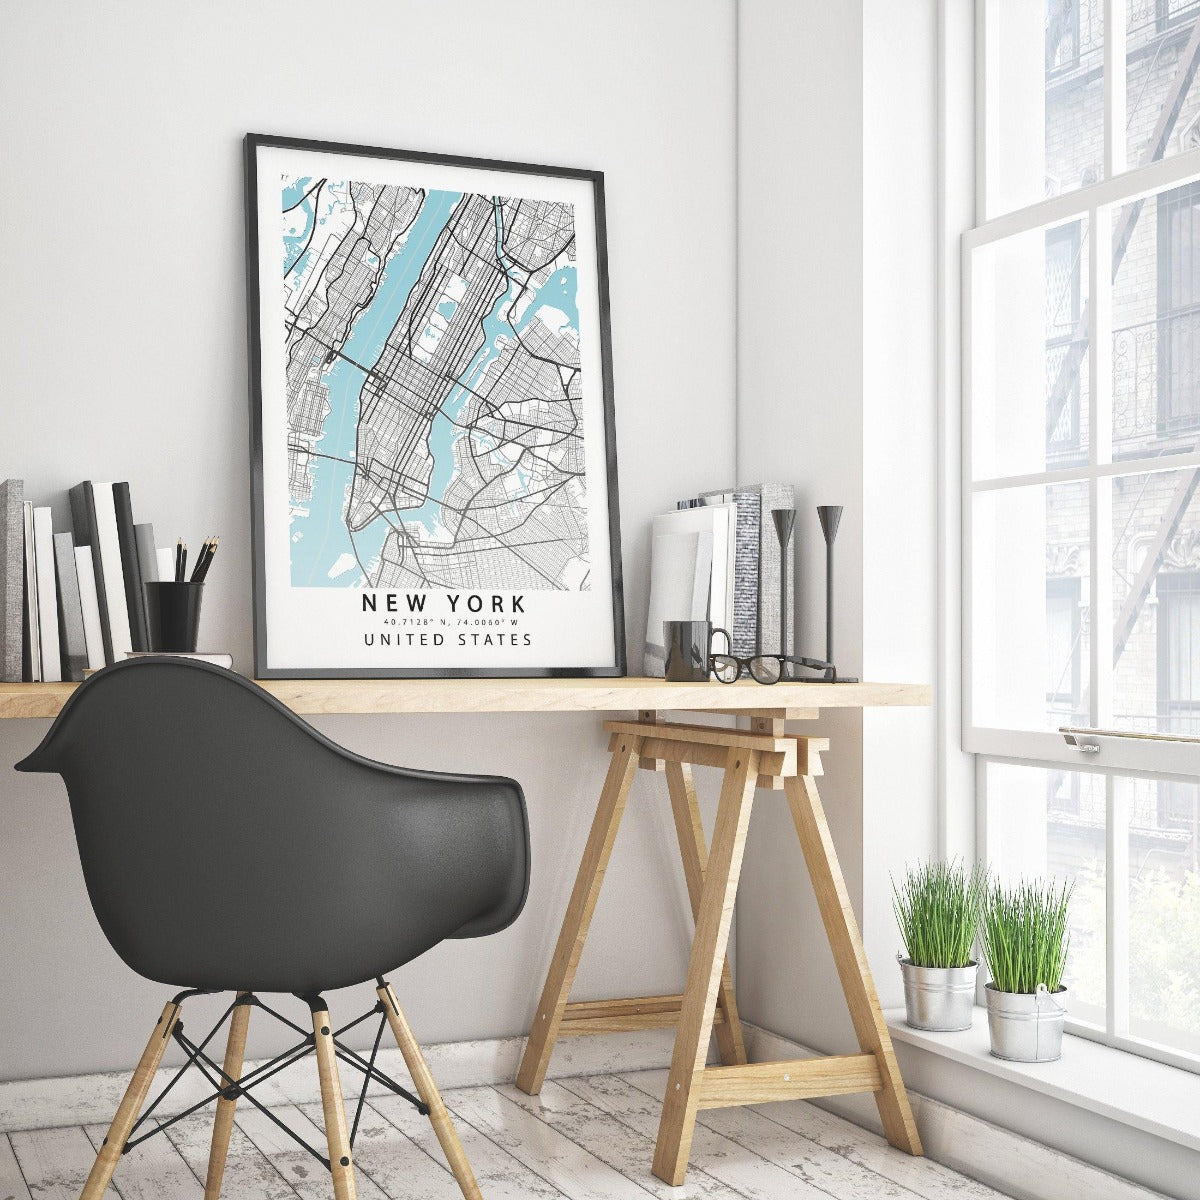 Embrace your inner wanderlust. Inspired by the concrete jungle that is New York City, this map print is the perfect way to show your love for the city that never sleeps. With a beautiful and minimalist design, it would look great in any living space. Hang it in your bedroom, living room or office and dream of adventures in the big city. - 98types